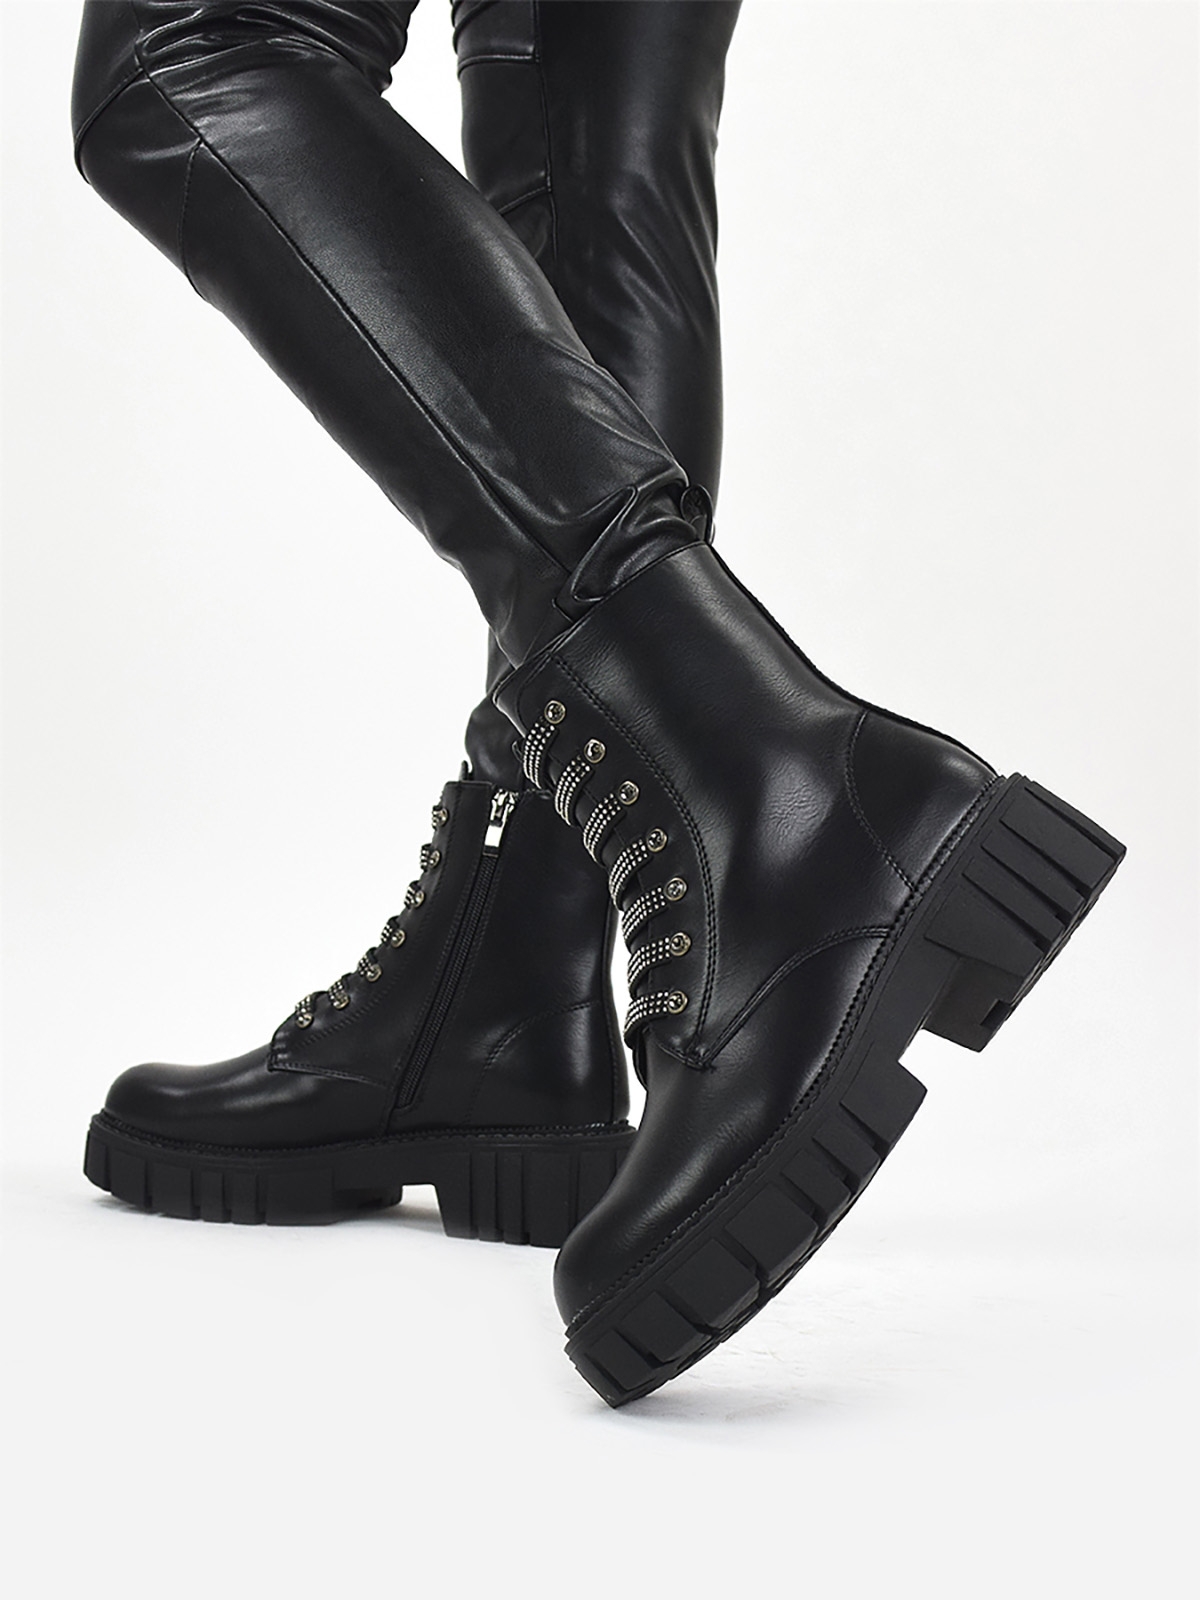 Chunky ankle boots with front metal details in black